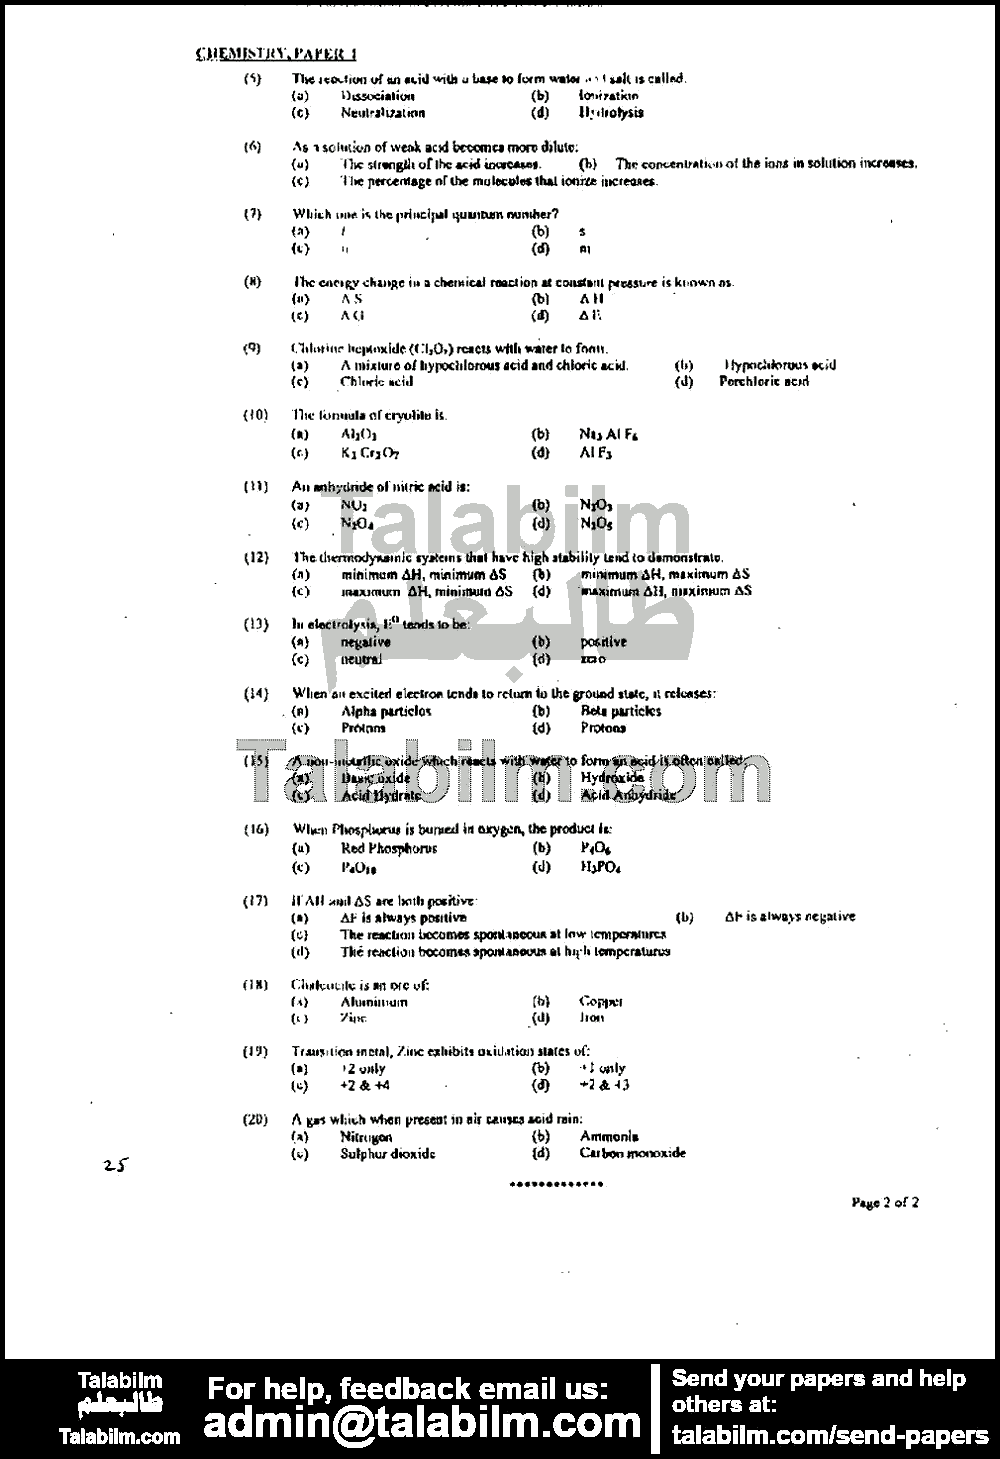 Chemistry 0 past paper for 2005 Page No. 2